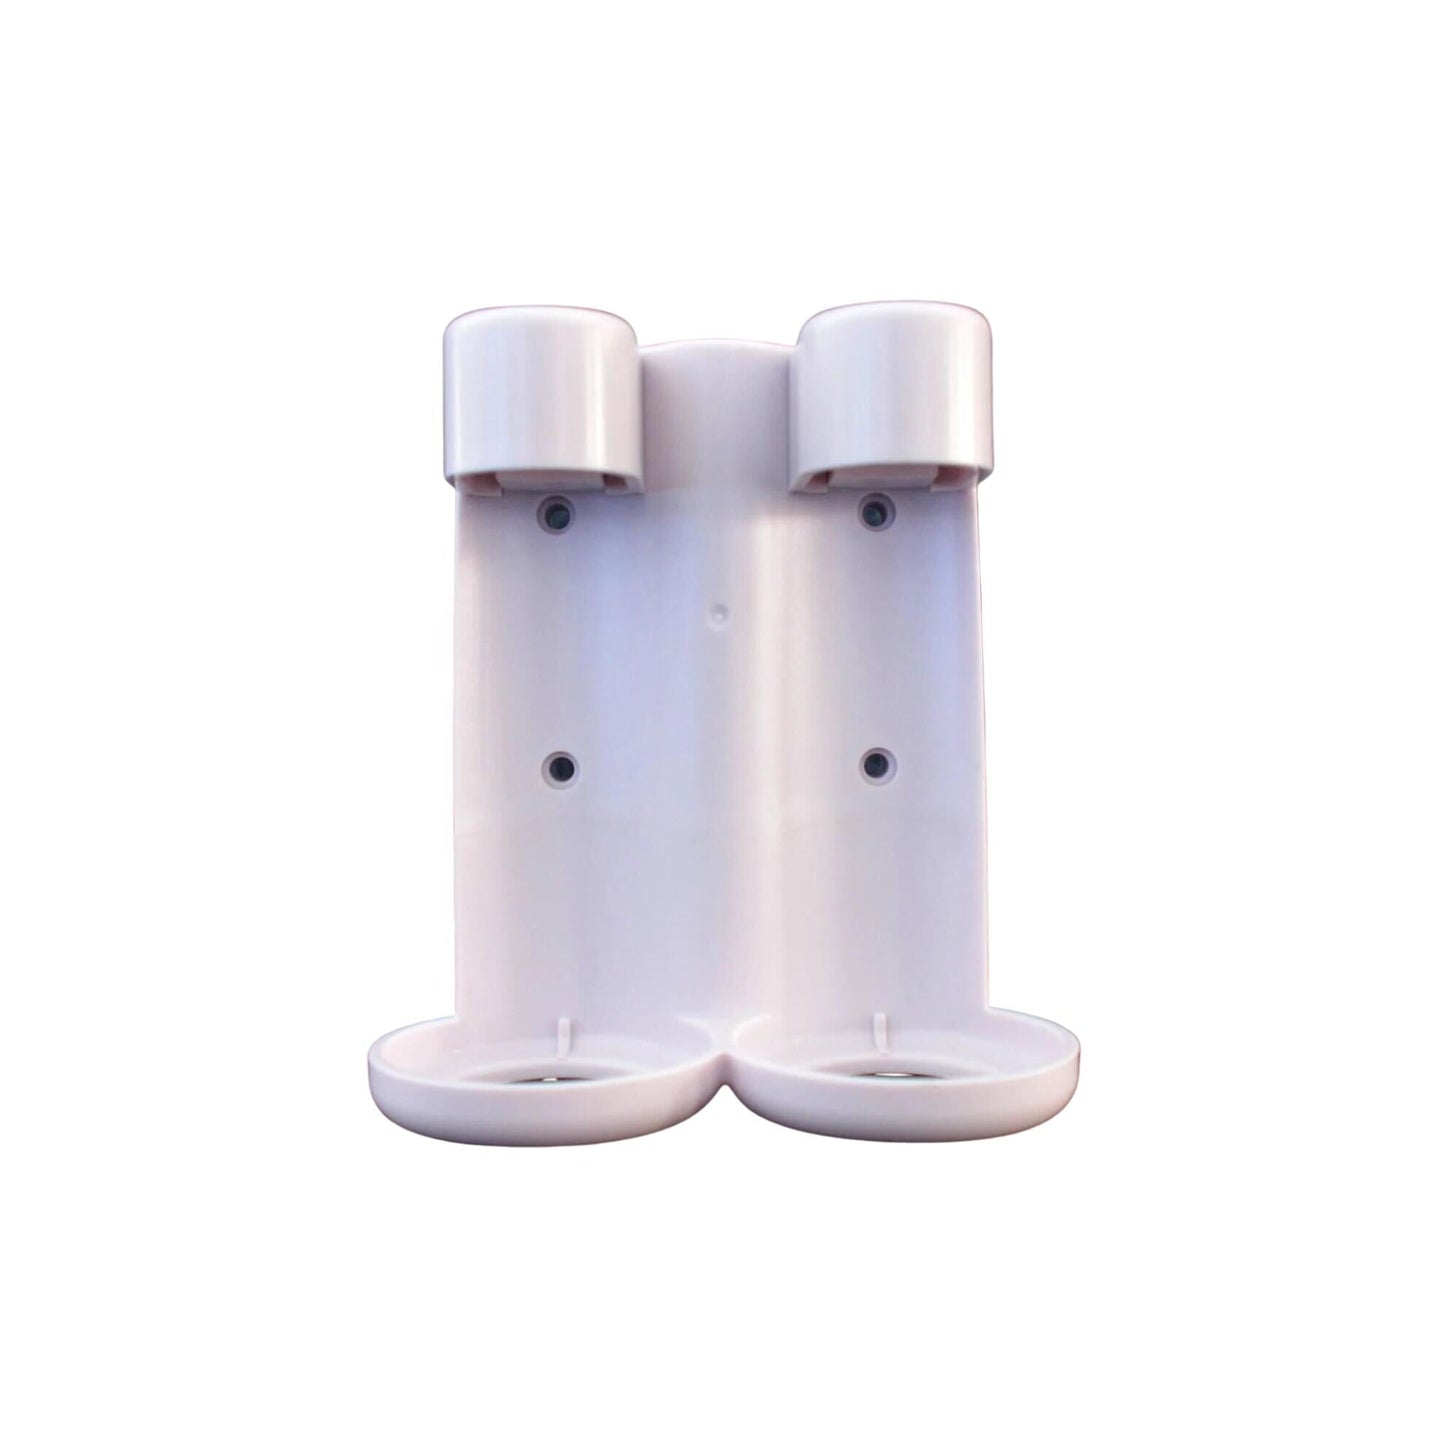 Double 250ml (9oz) ABS Plastic Hotel Liquid Amenities Bottles Holder - White - Canadian Hotel Supplies